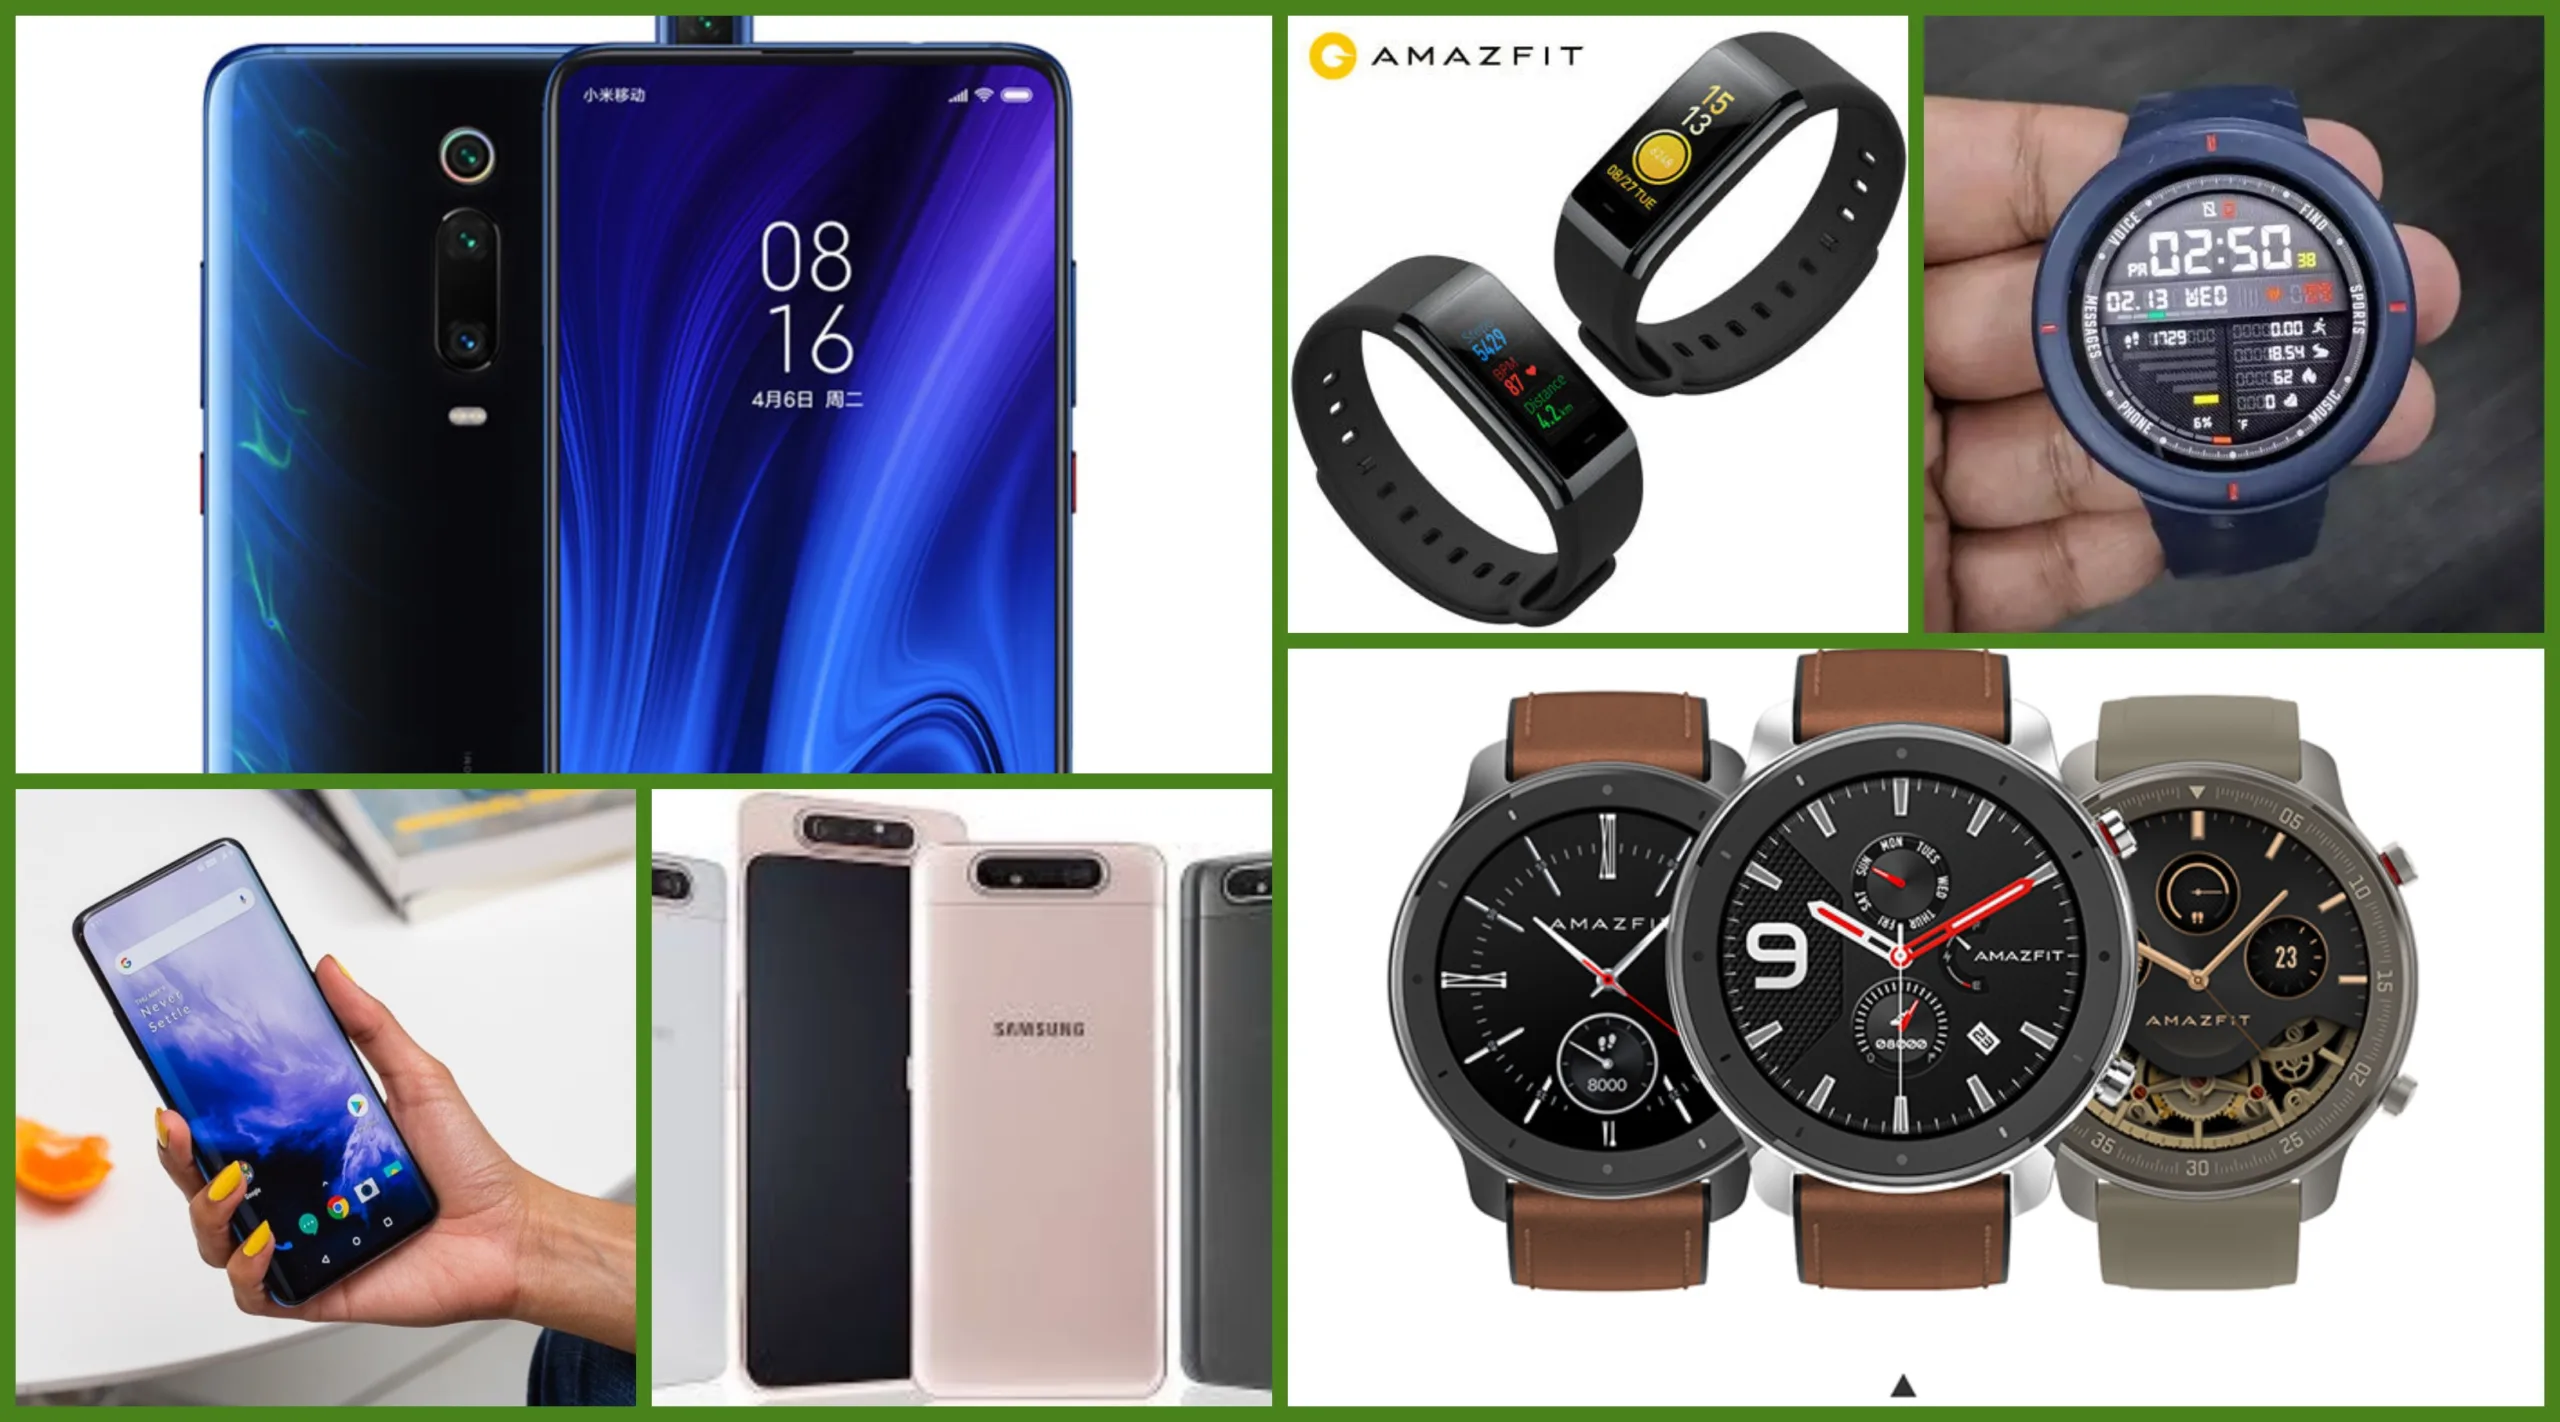 gearbest mobile and amazif sales